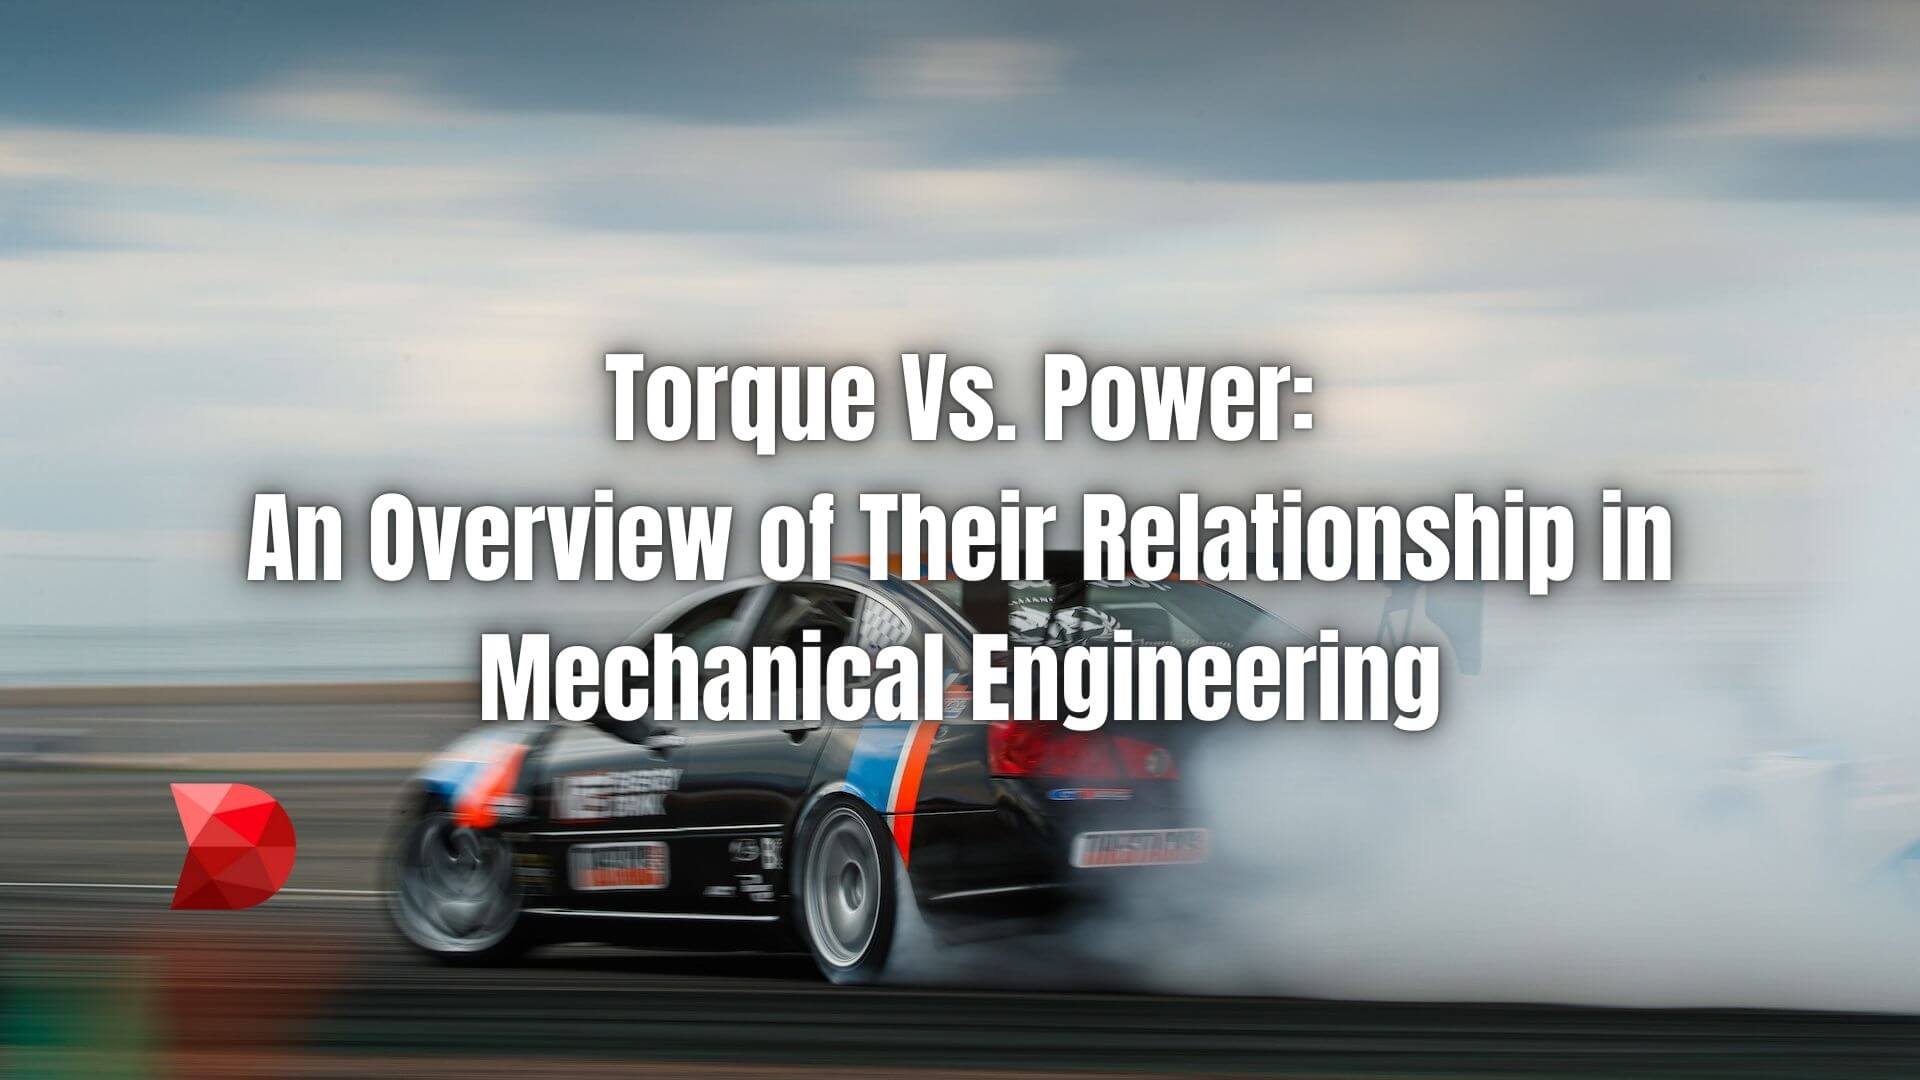 The relationship between torque and power plays a pivotal role in designing, operating, and optimizing mechanical systems. Learn more!